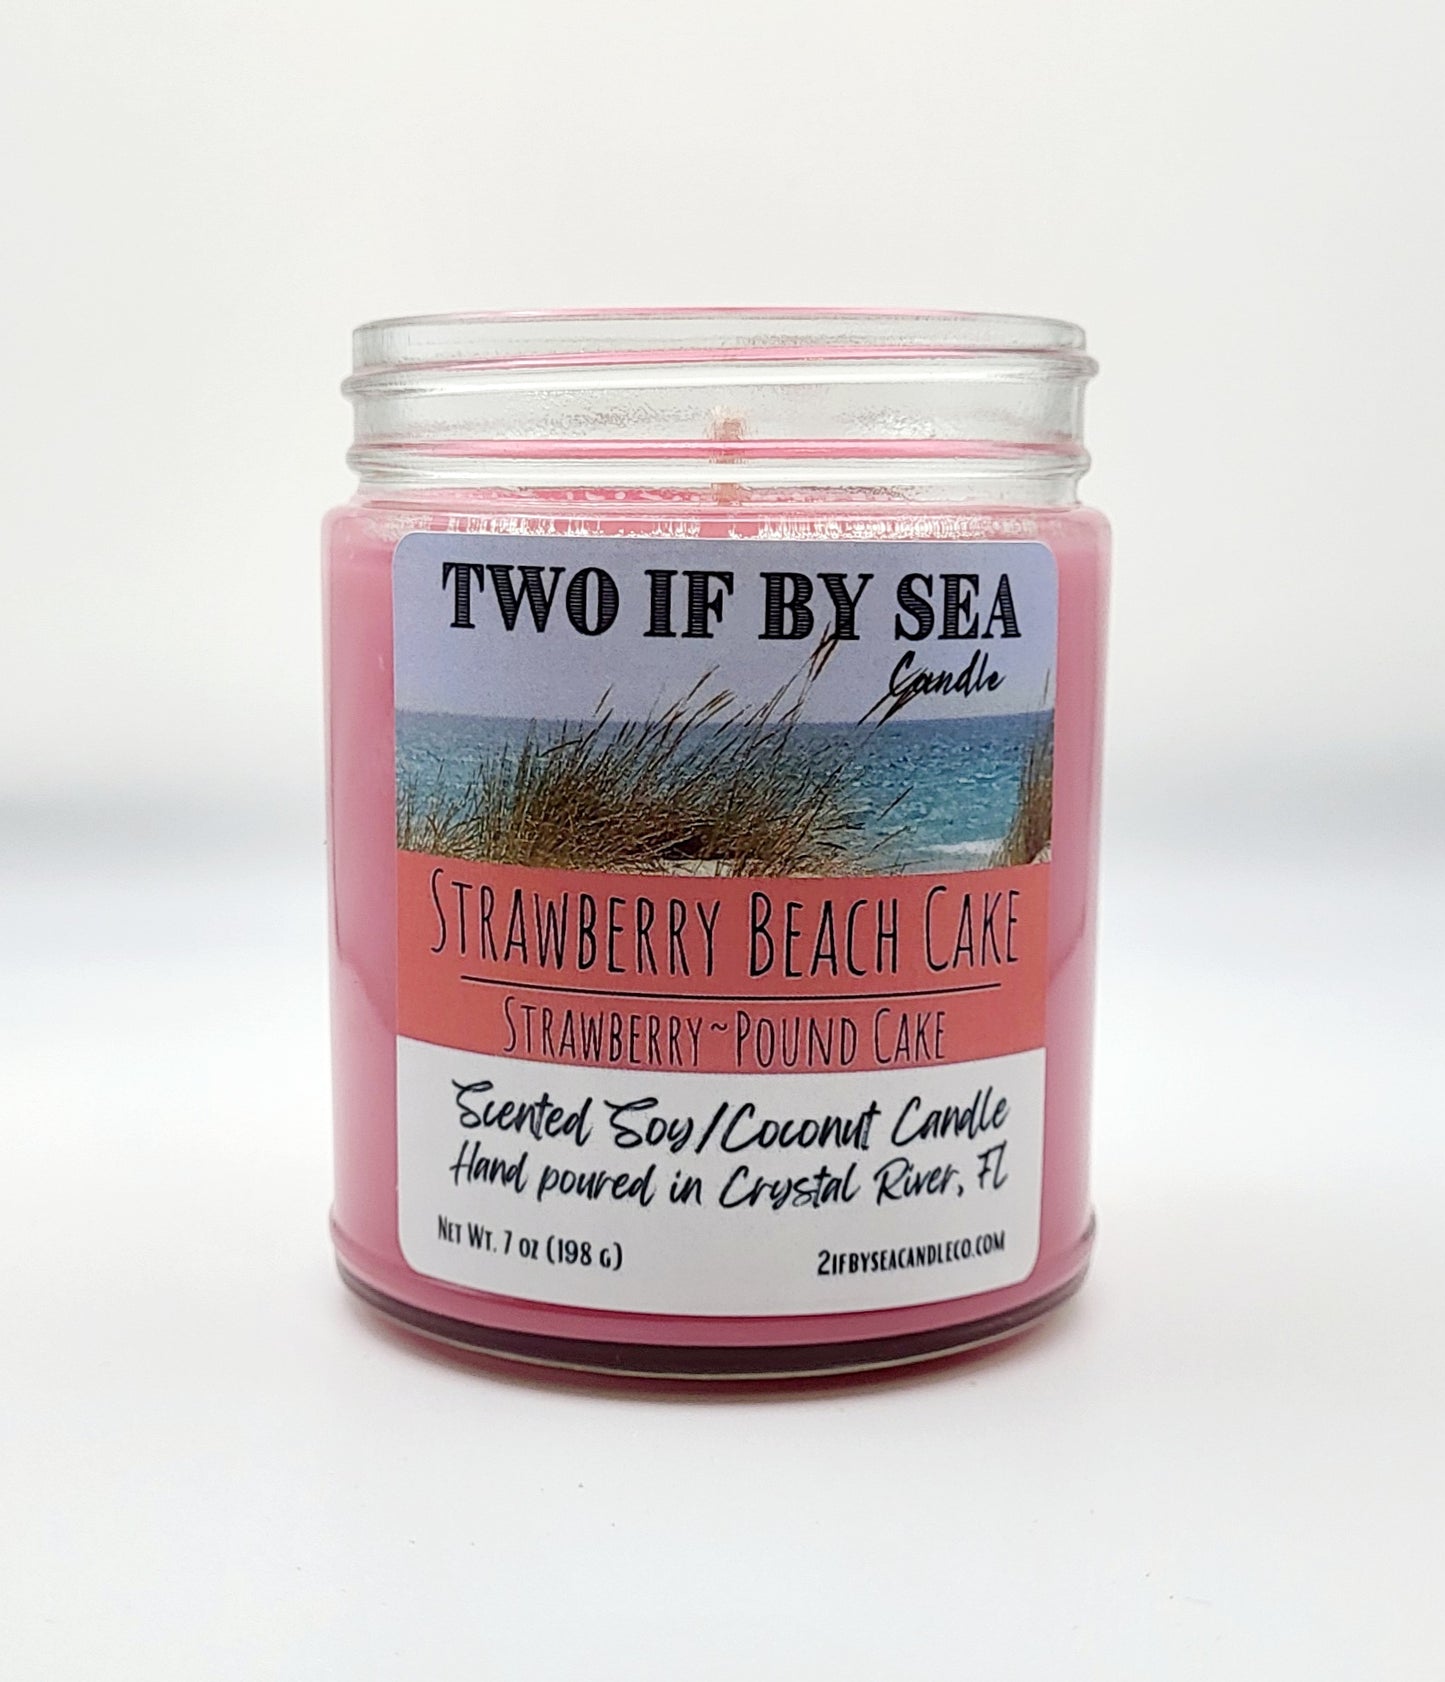 Strawberry Beach Cake Scented Soy/Coconut Candle